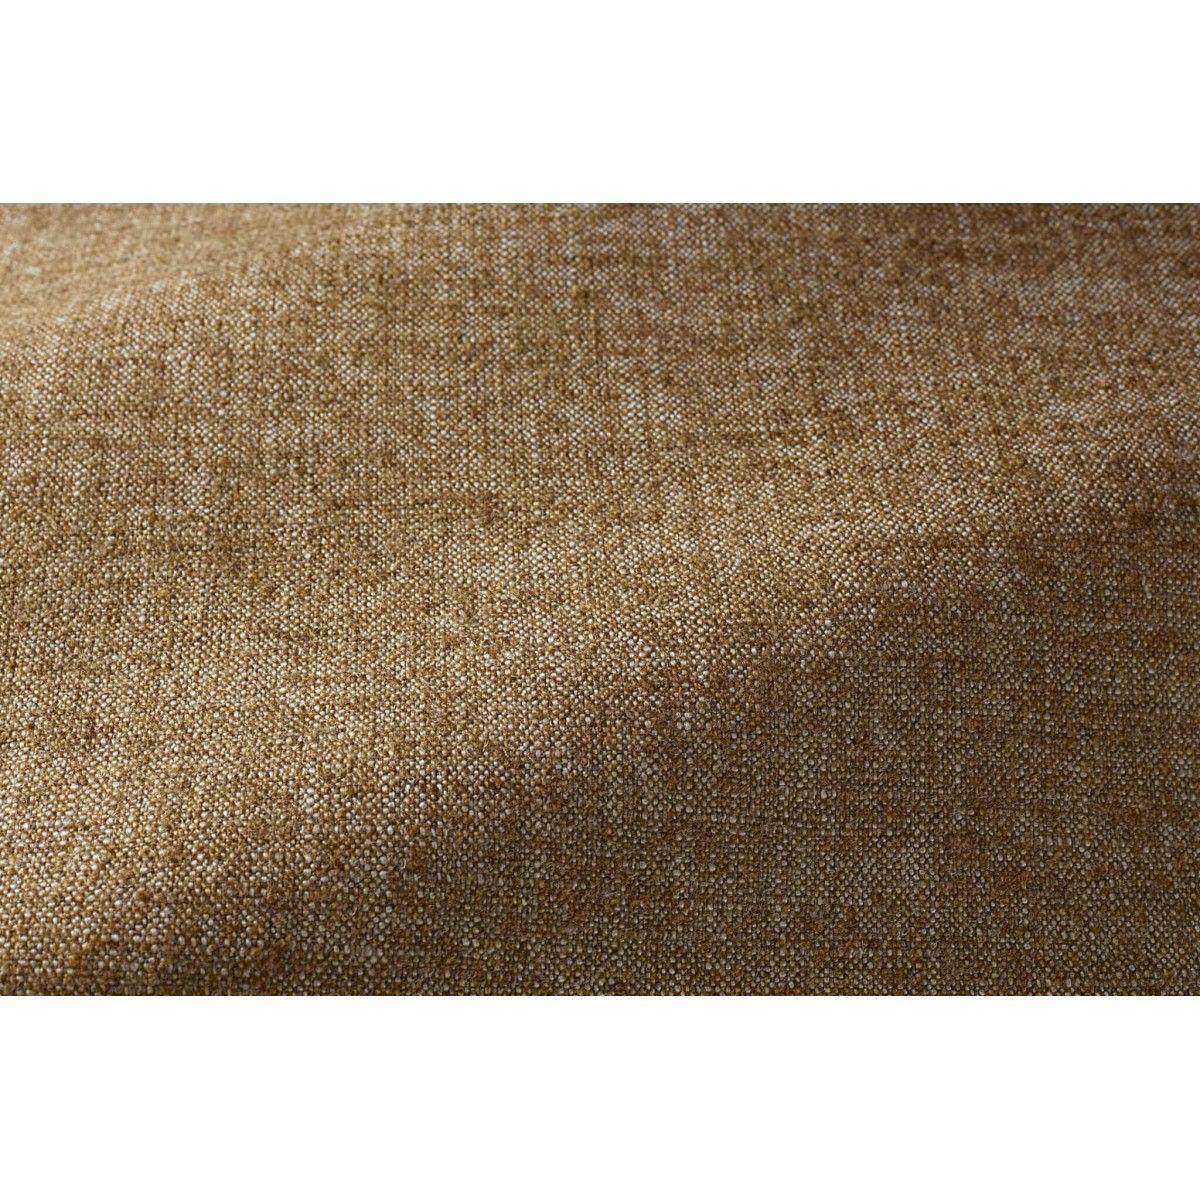 Popus Editions Giovanna 3 Seater Sofa in Ocher London Linen Fabric.

Giovanna is a sofa with a strong profile. A sober, plush line, with this famous detail that changes everything, so as not to forget its strength of character and this charming